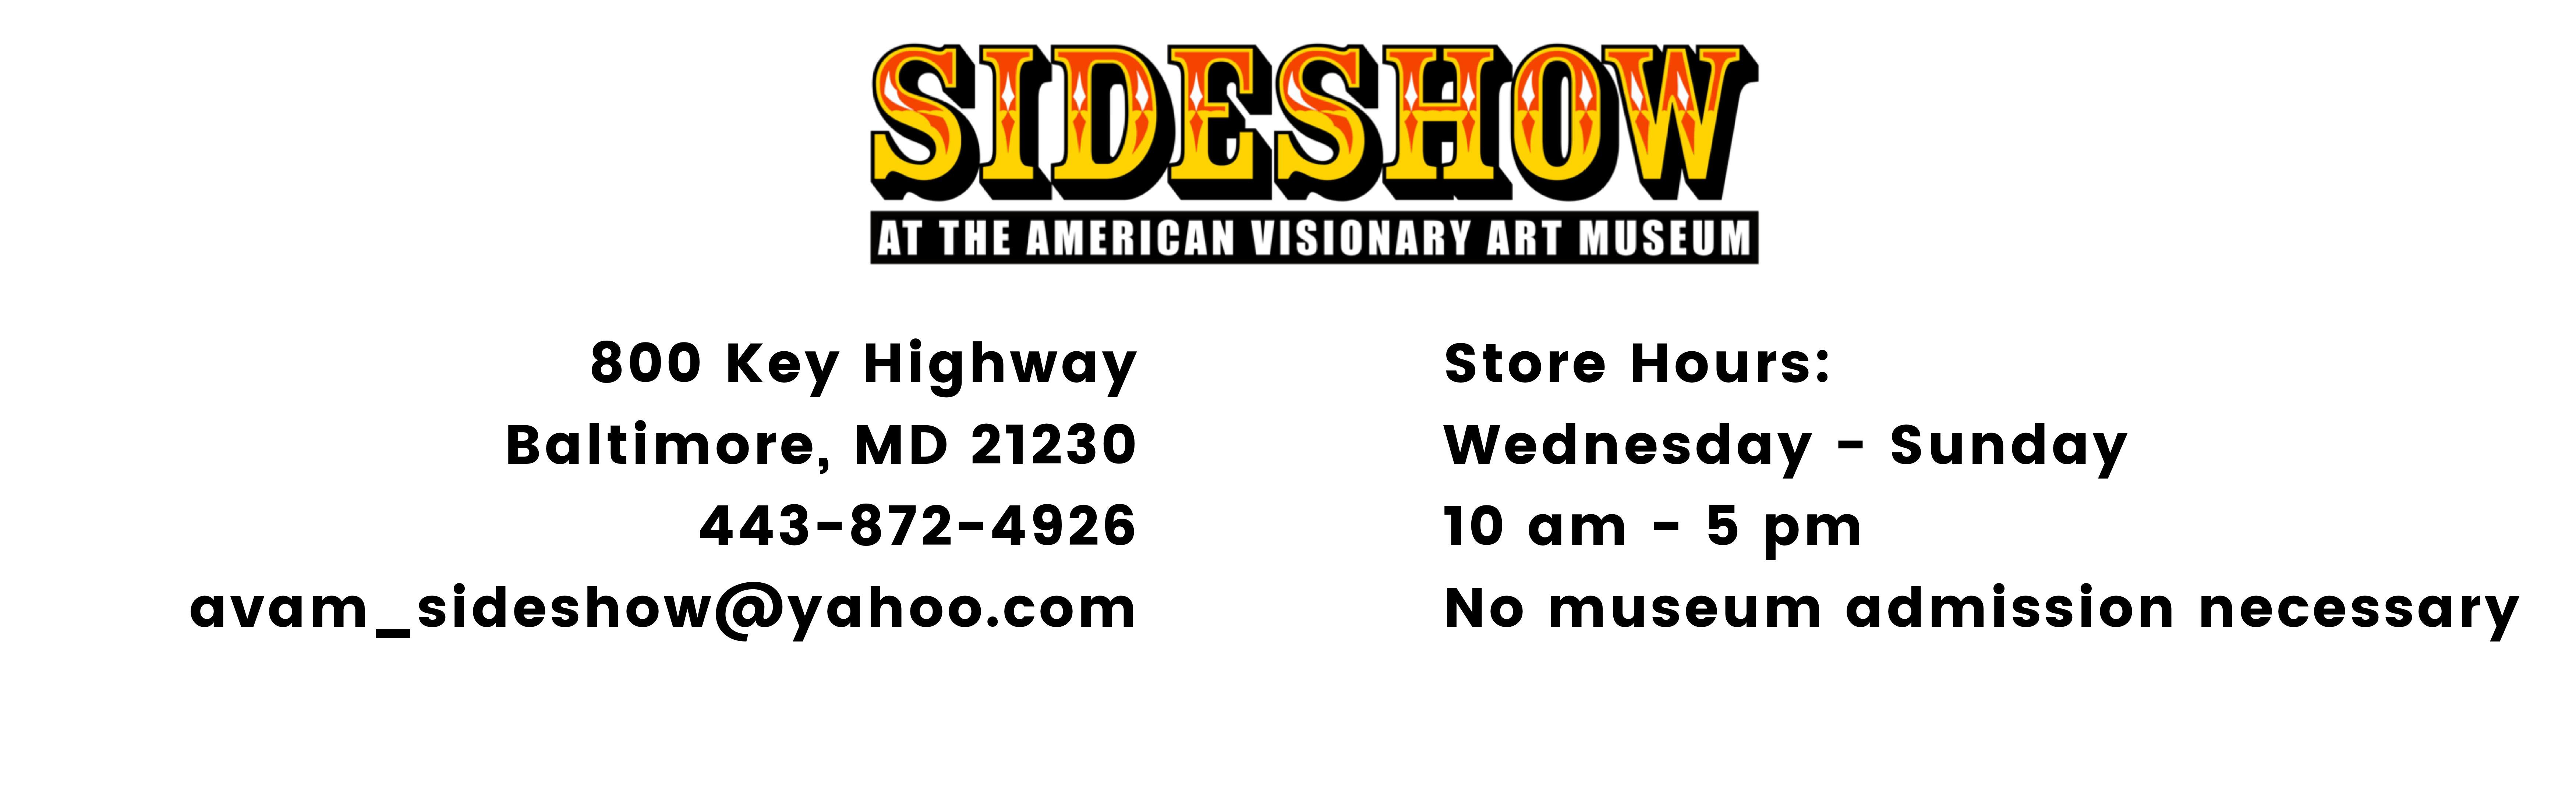 800 Key Highway Baltimore, MD 21230. 443-872-4926. avam_sideshow@yahoo.com. Store hours: Wednesday through Friday from 10am til 5 pm. No museum admission necessary